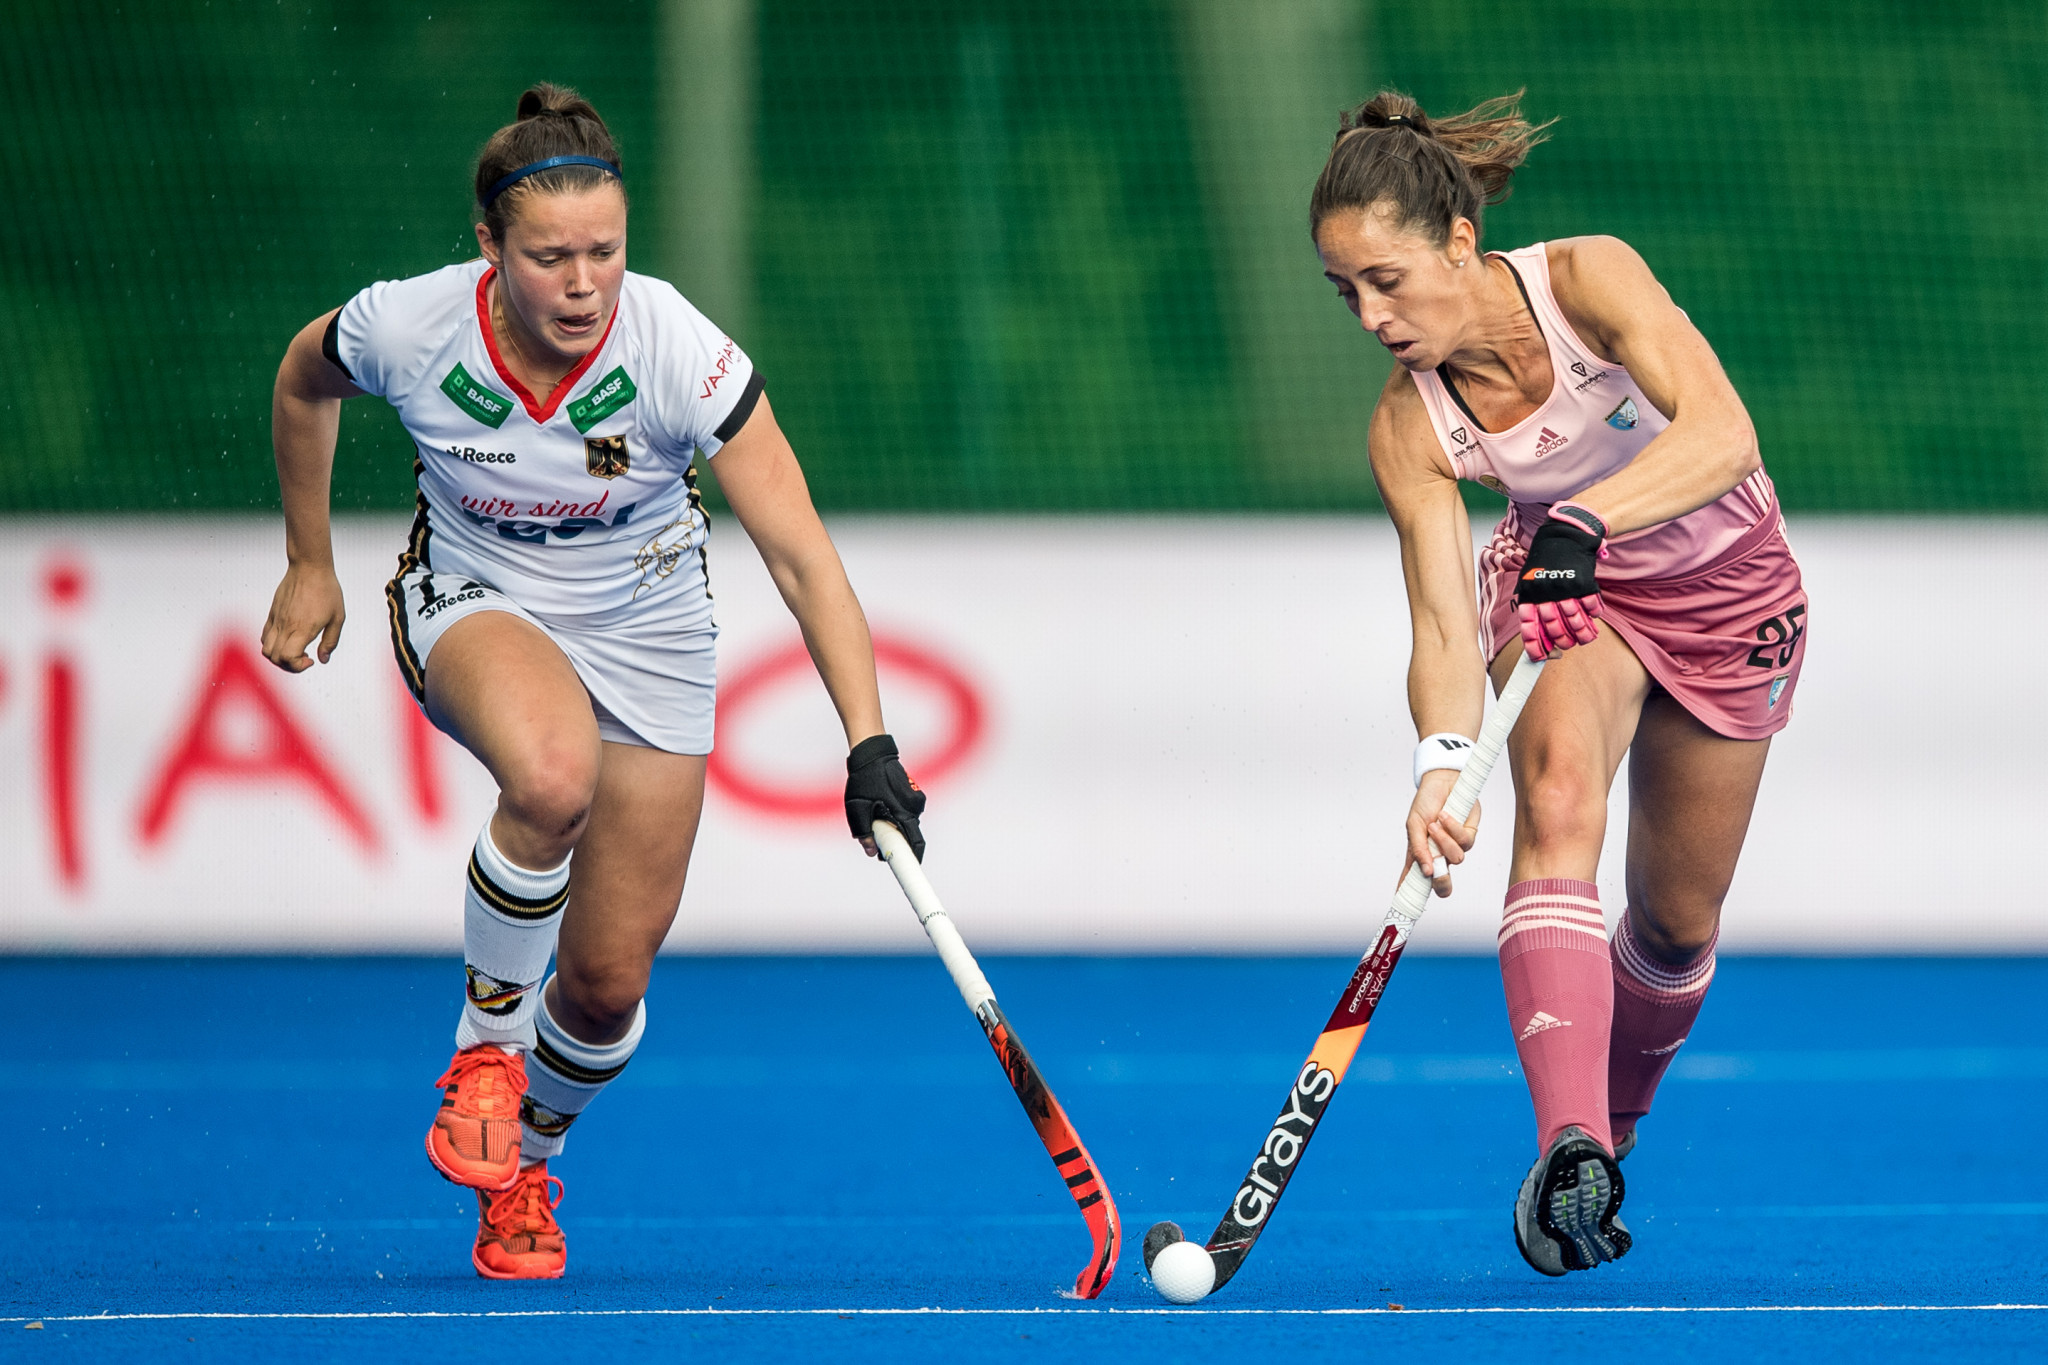 Argentina fought back against Germany to win 2-1 in the women's FIH Pro League ©Getty Images